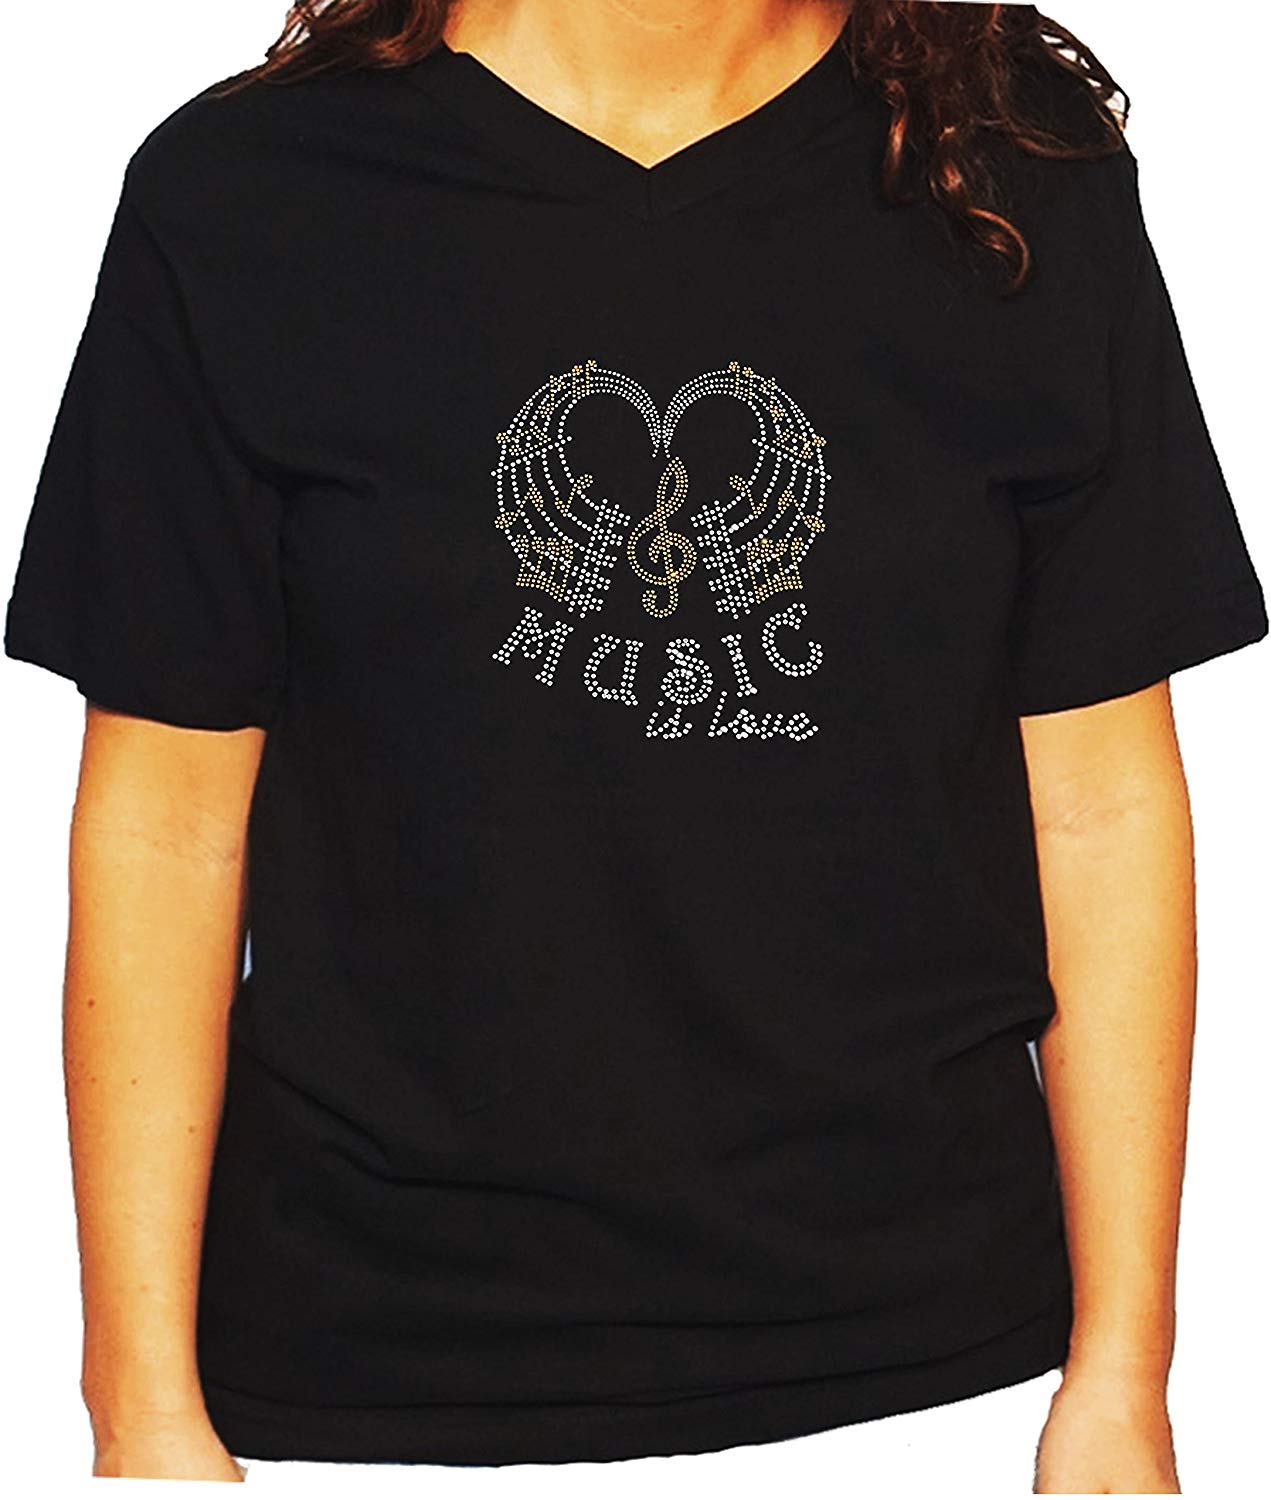 Women's / Unisex T-Shirt with Music Is Love With Music Notes In Rhinestones